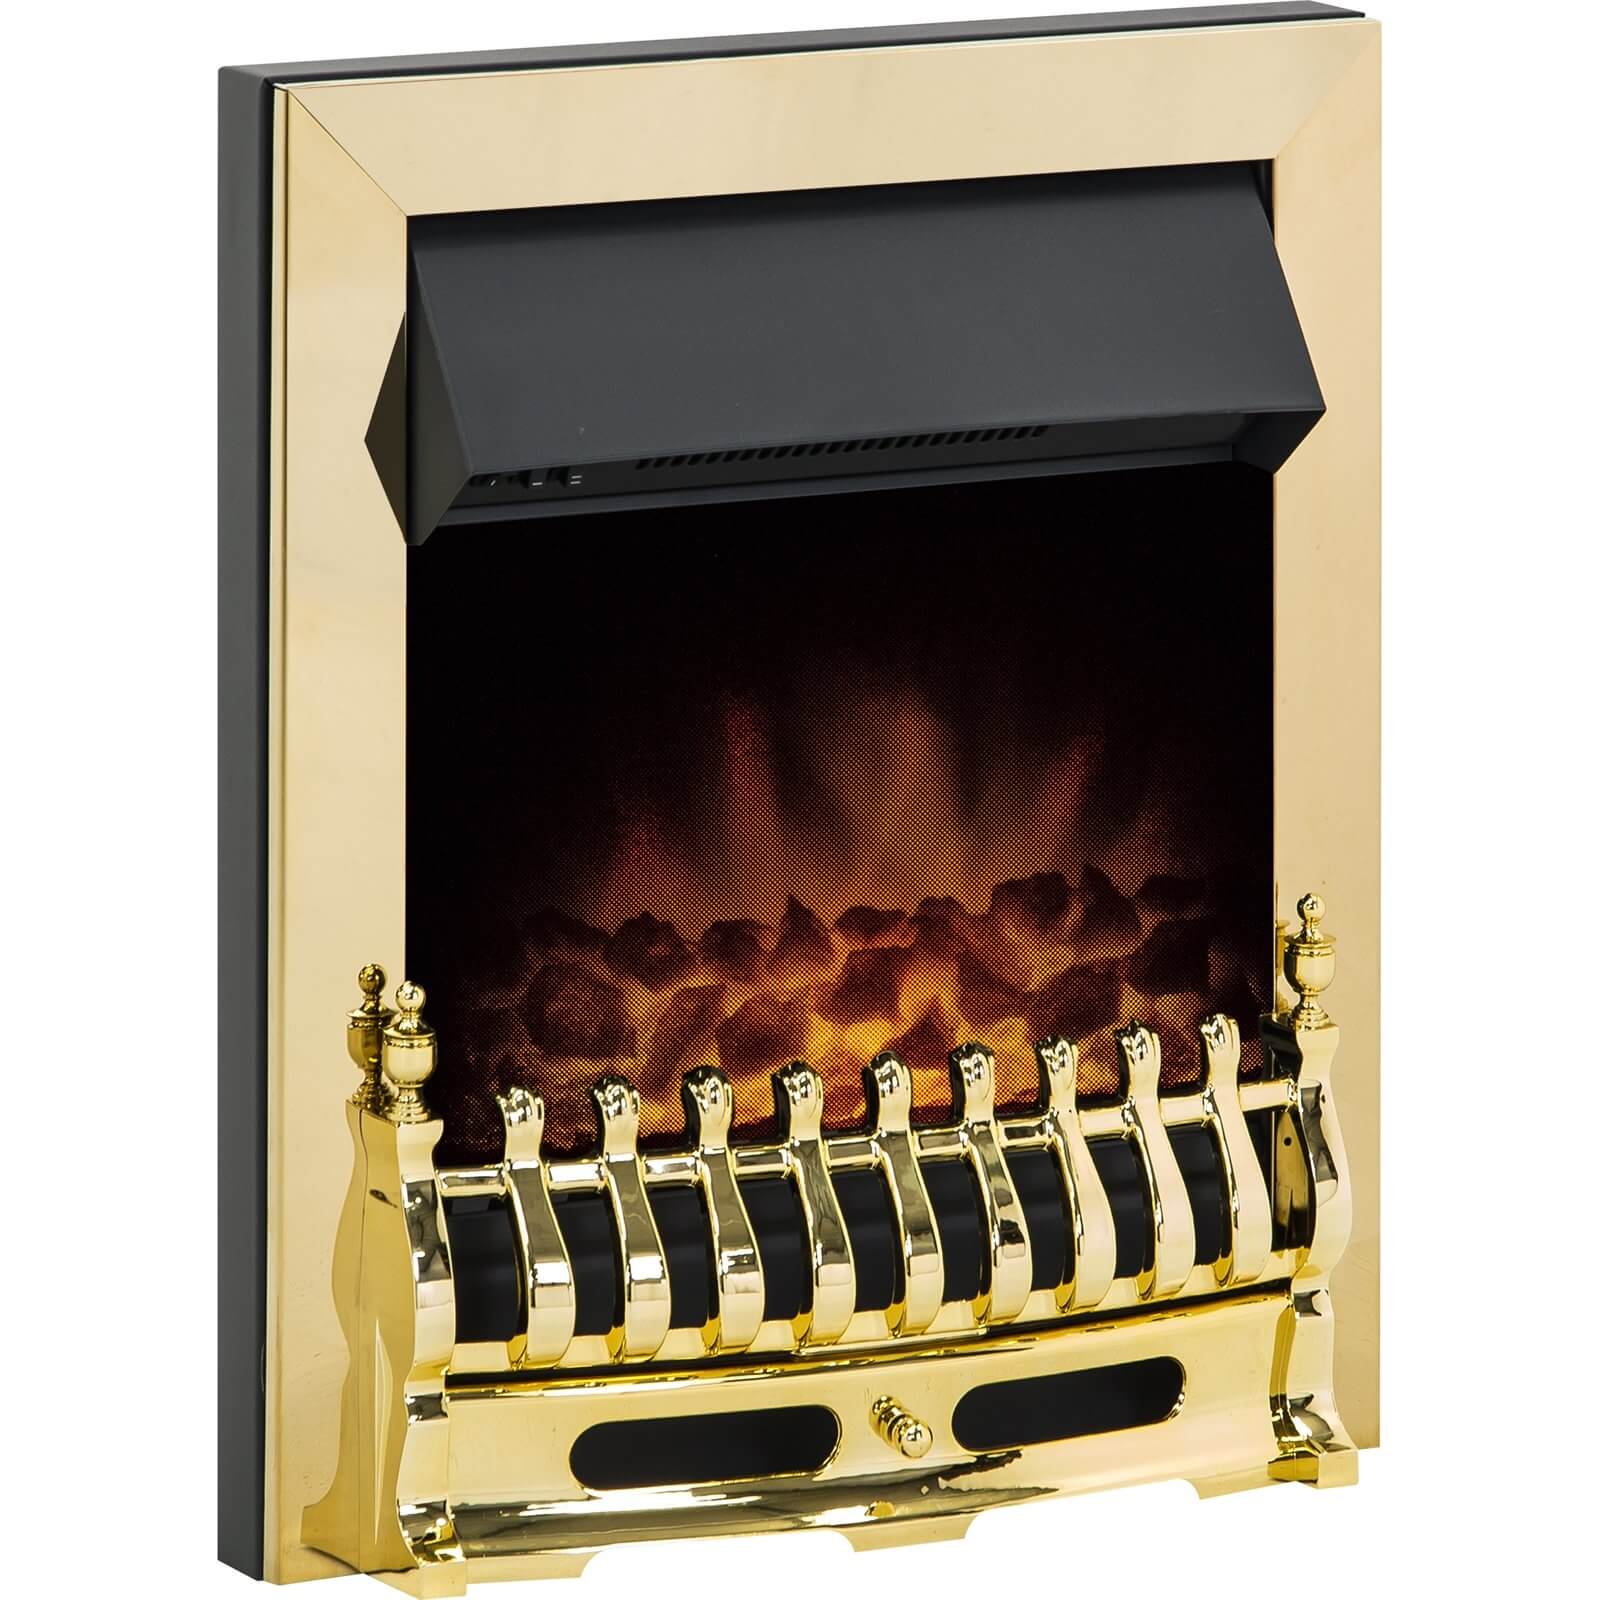 Adam Blenheim Electric Fire with Inset Fitting in Brass